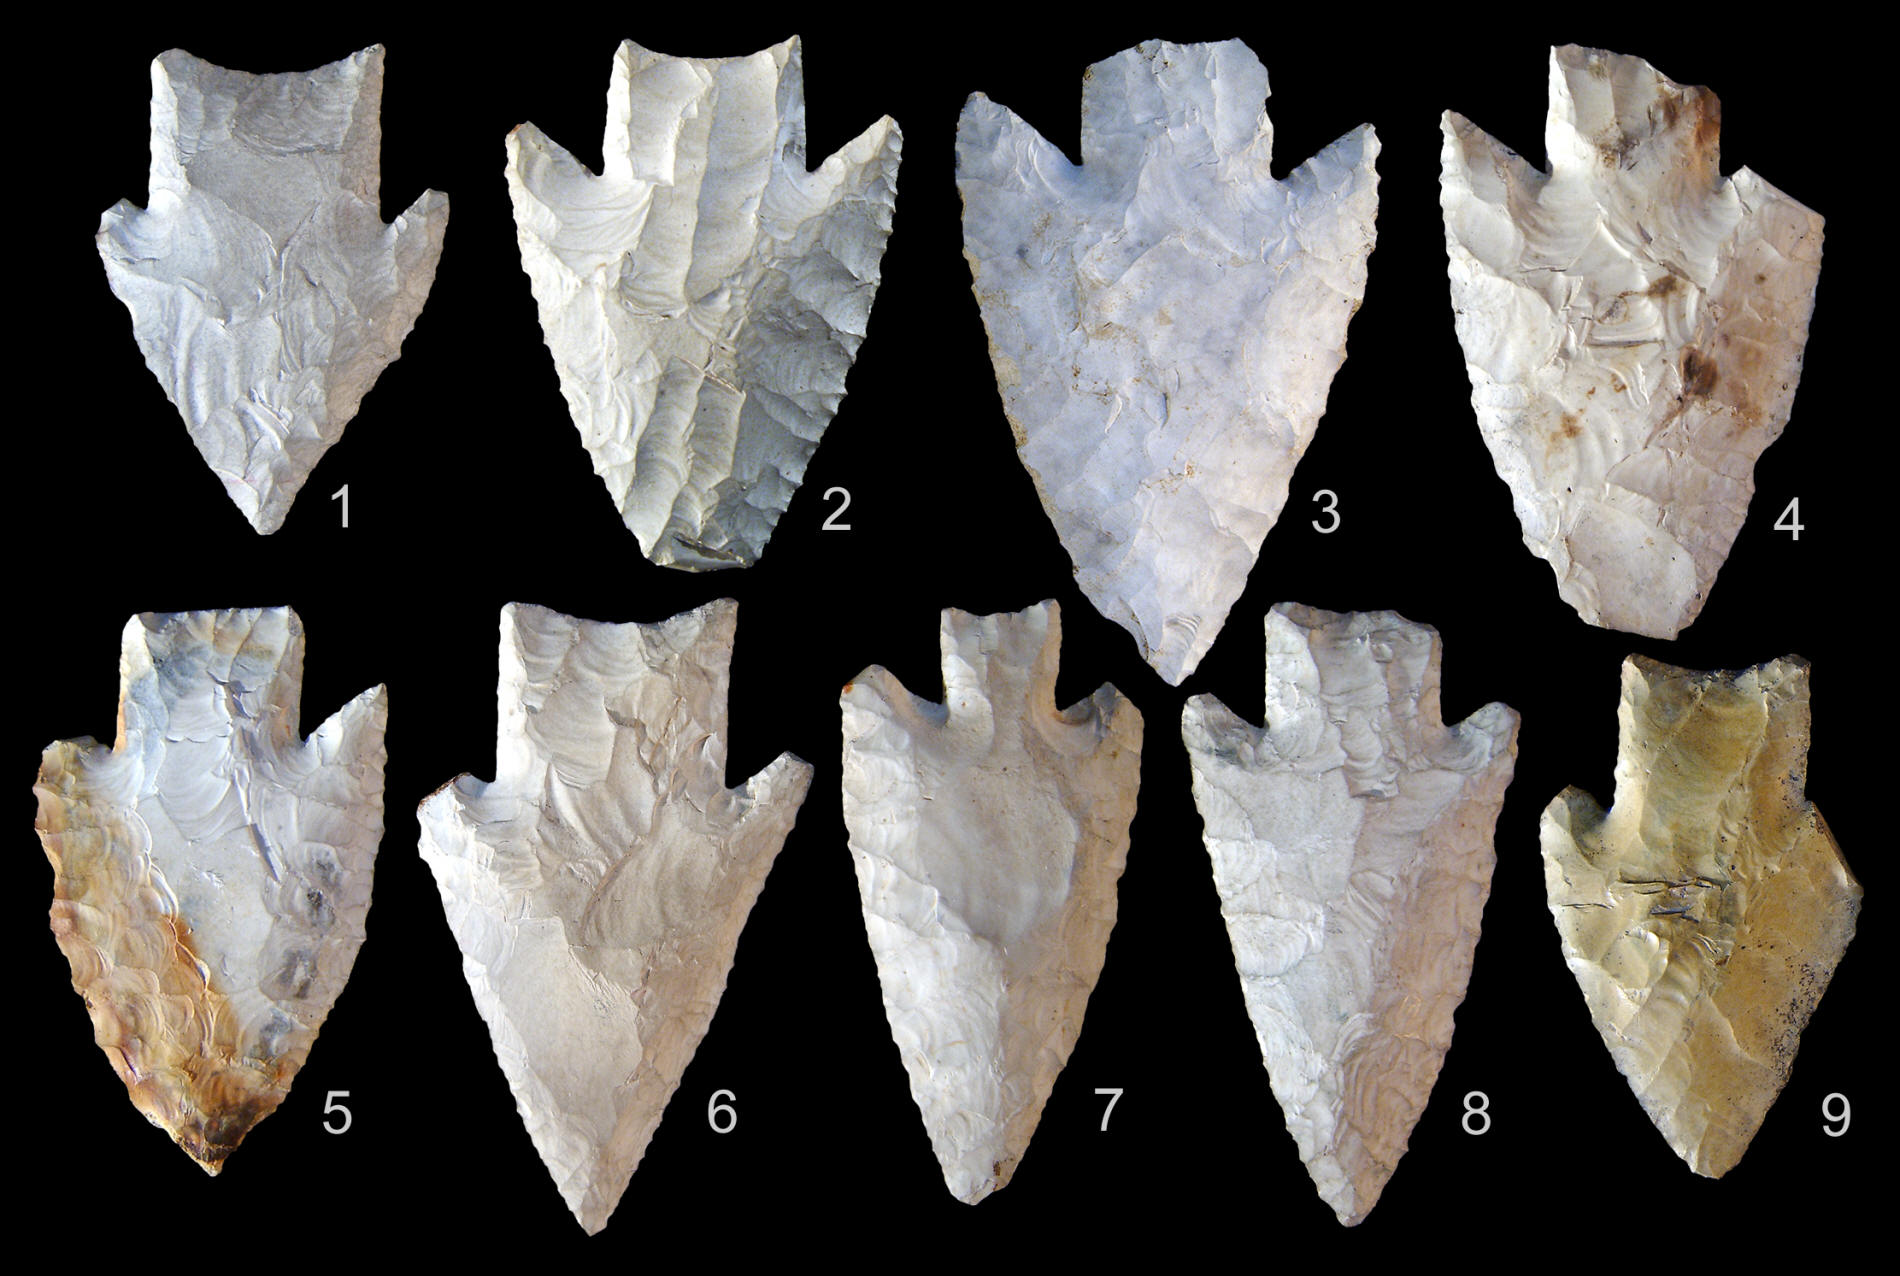 Nine examples of Lowe points from northern Belize.